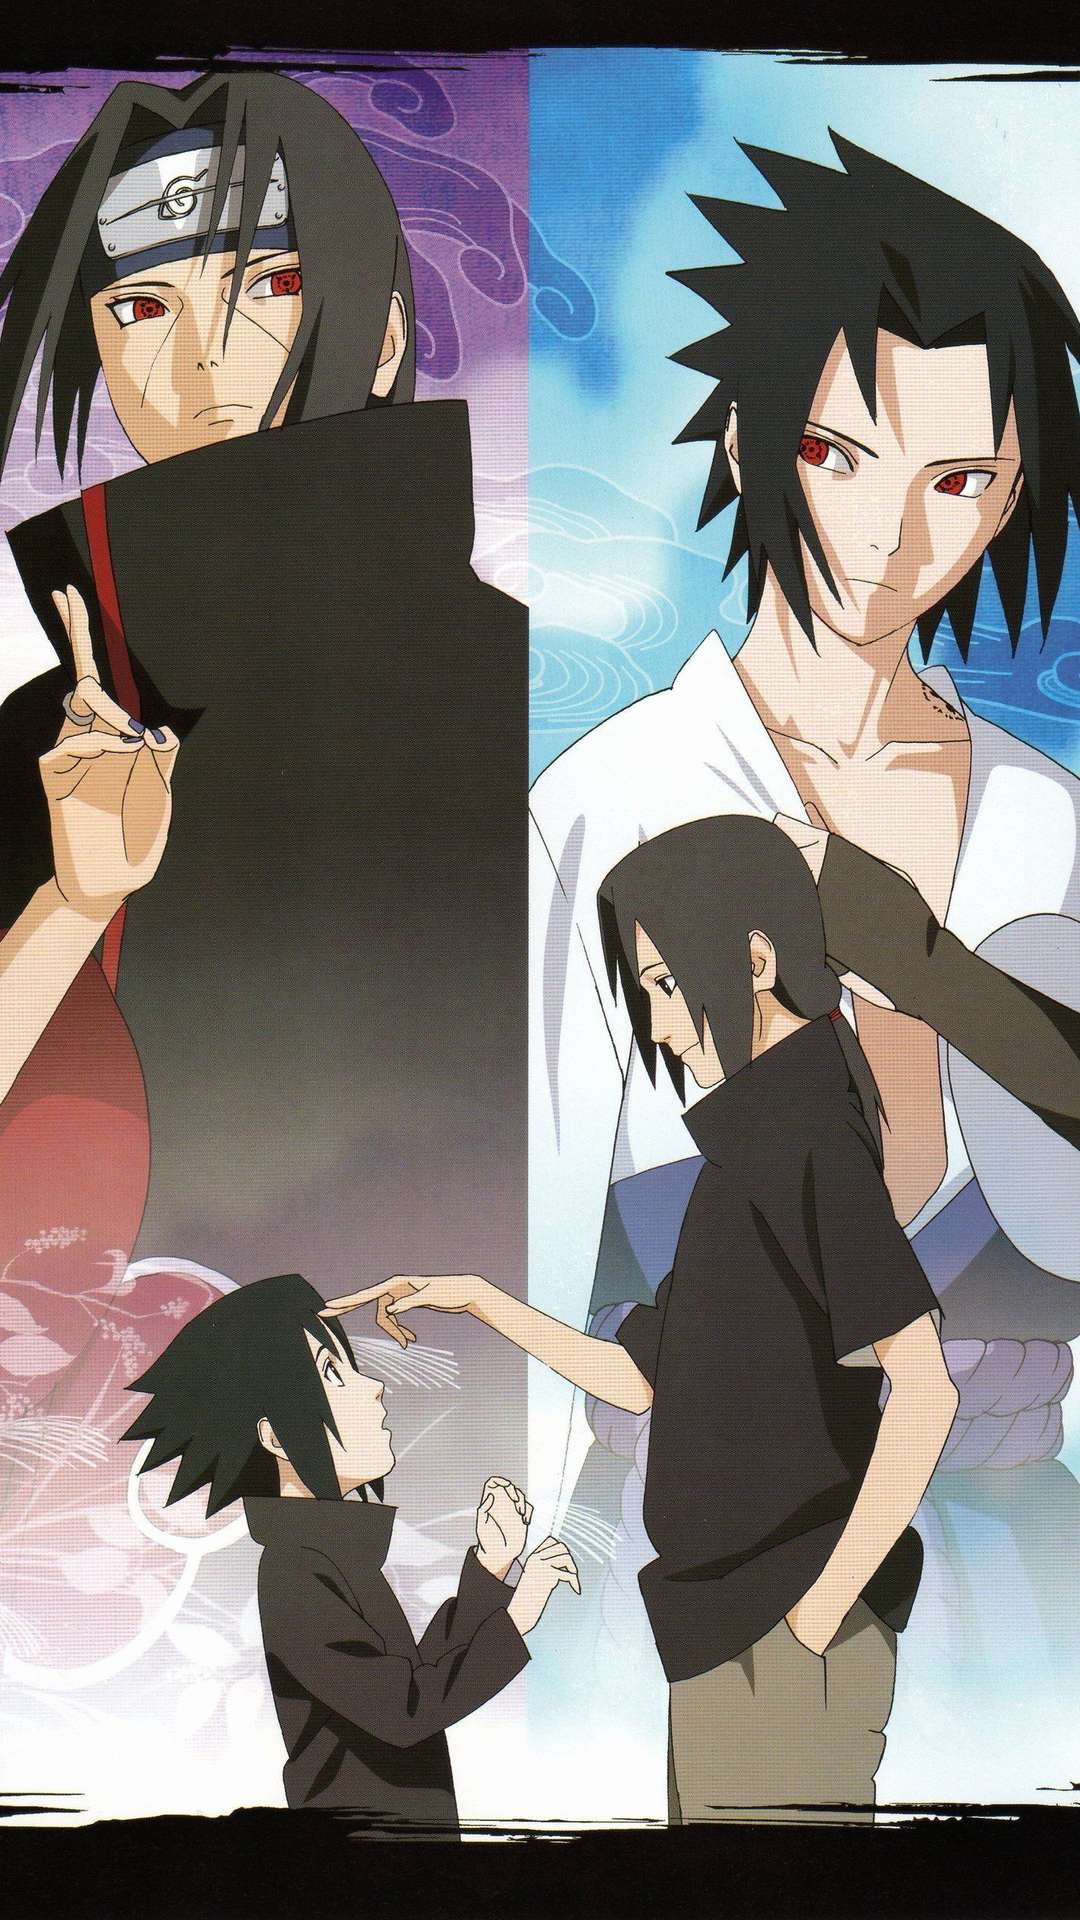 278+ Sasuke Uchiha Wallpapers for iPhone and Android by Paul Tate